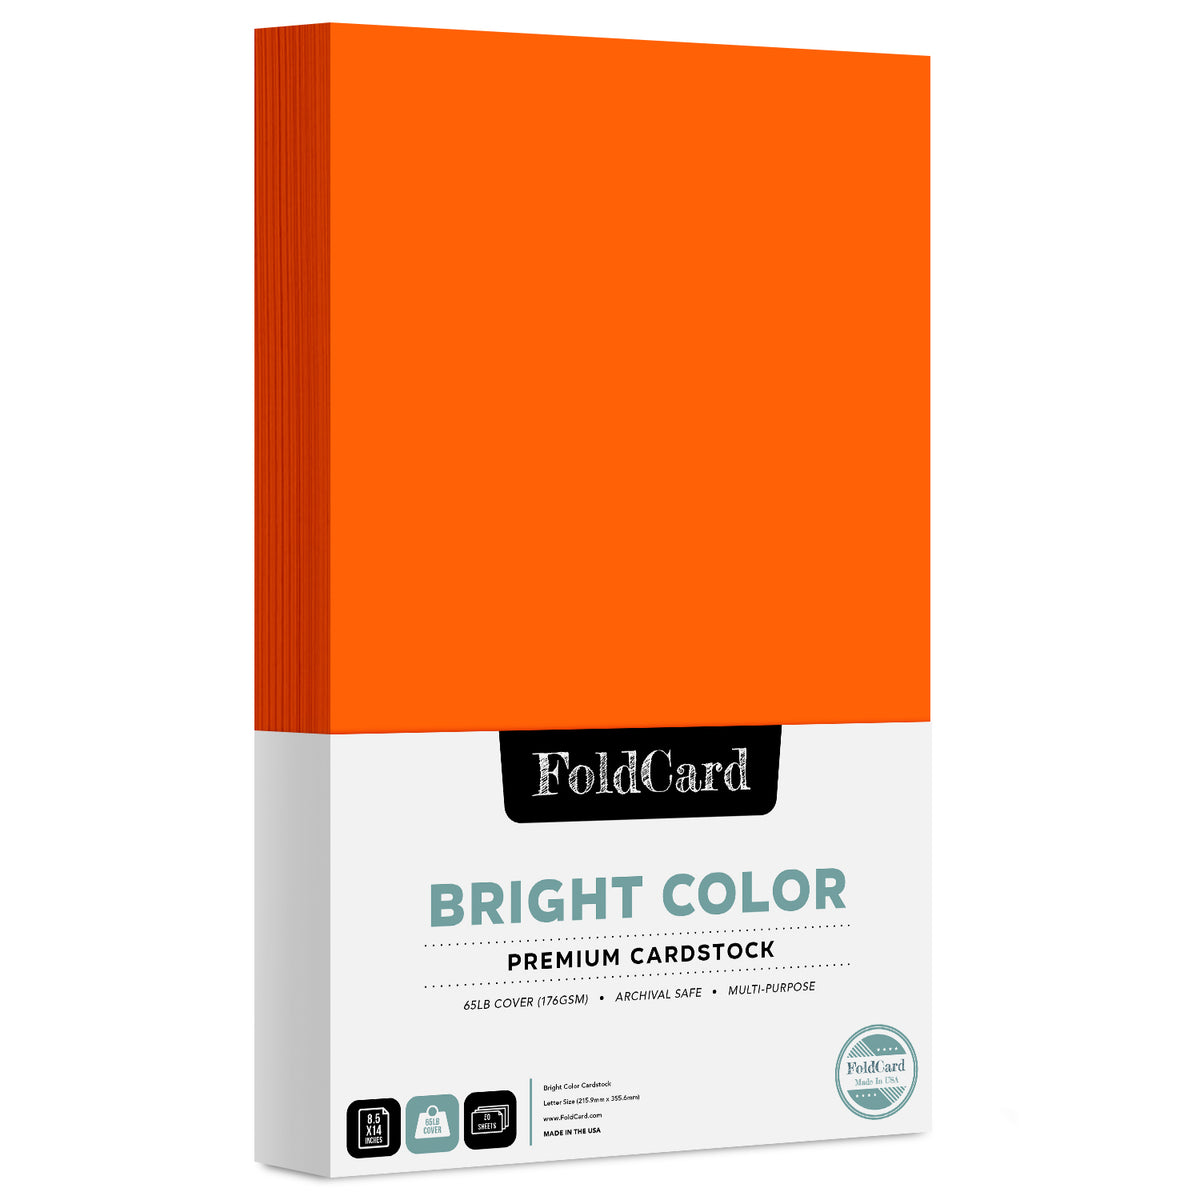 Premium Quality Bright Color Cardstock: 8.5 x 14 - 50 Sheets of 65lb Cover Weight